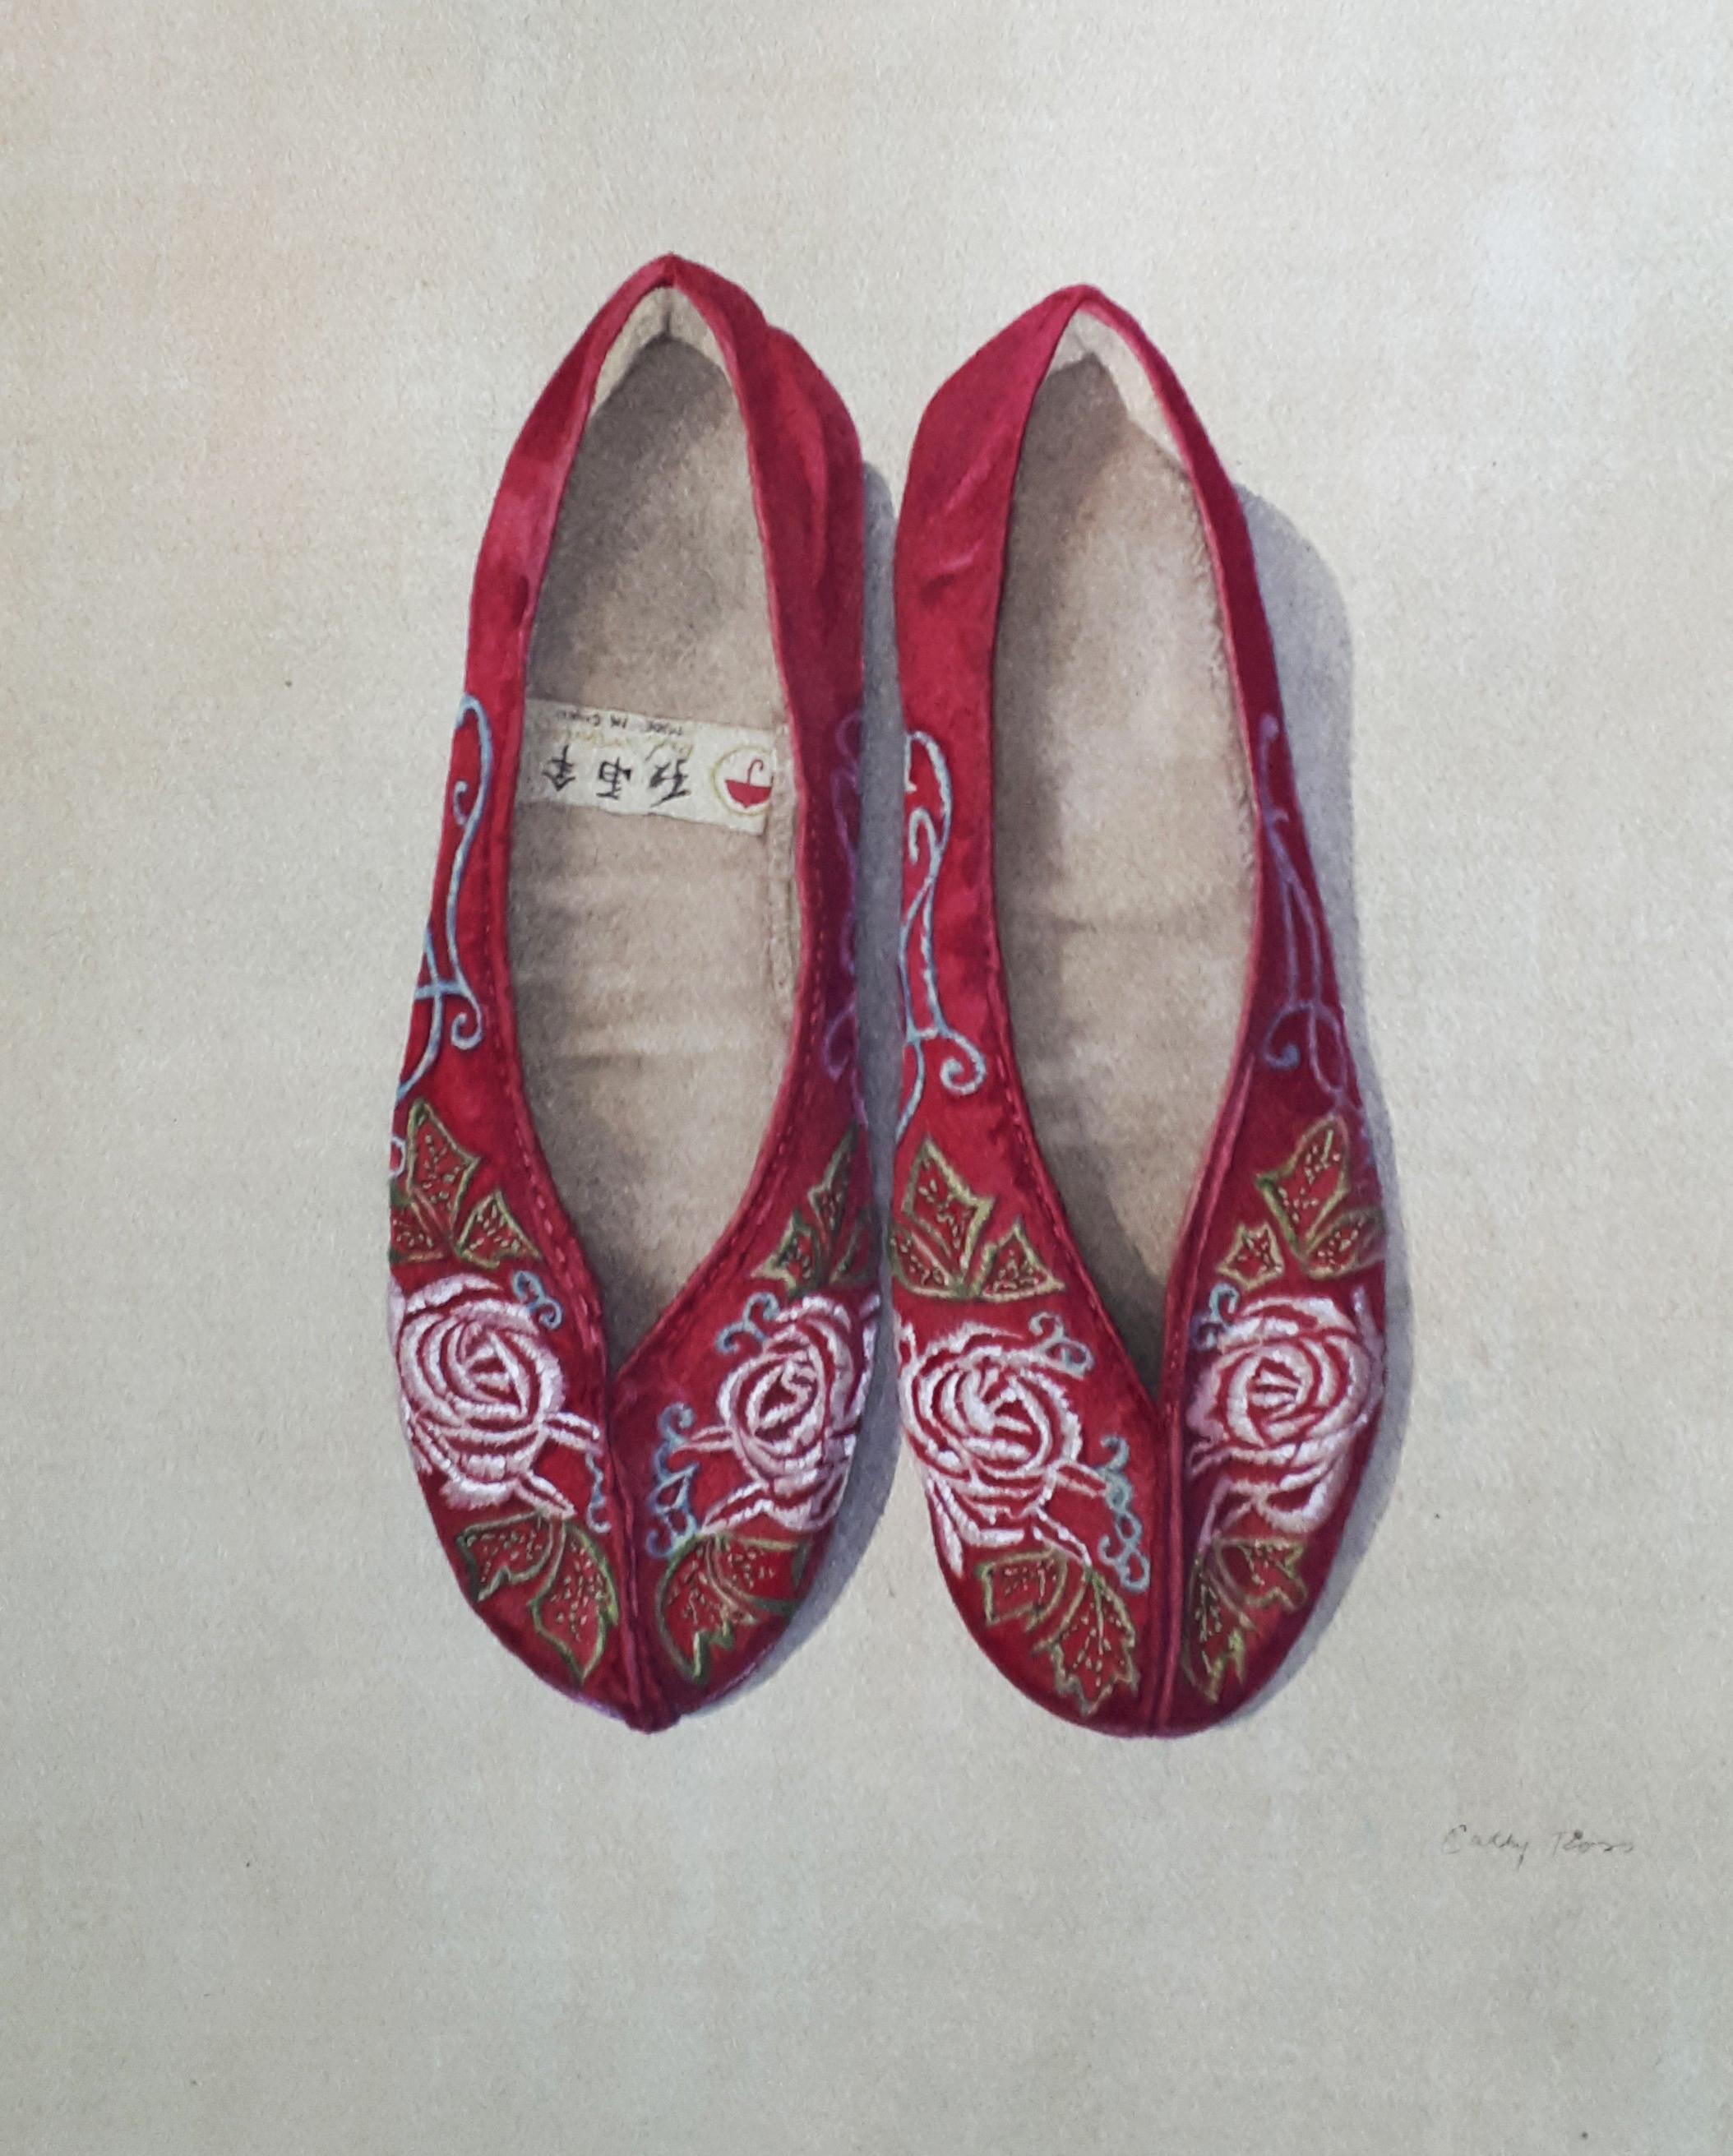 Cathy Ross Still-Life - Embroidered Red Slippers